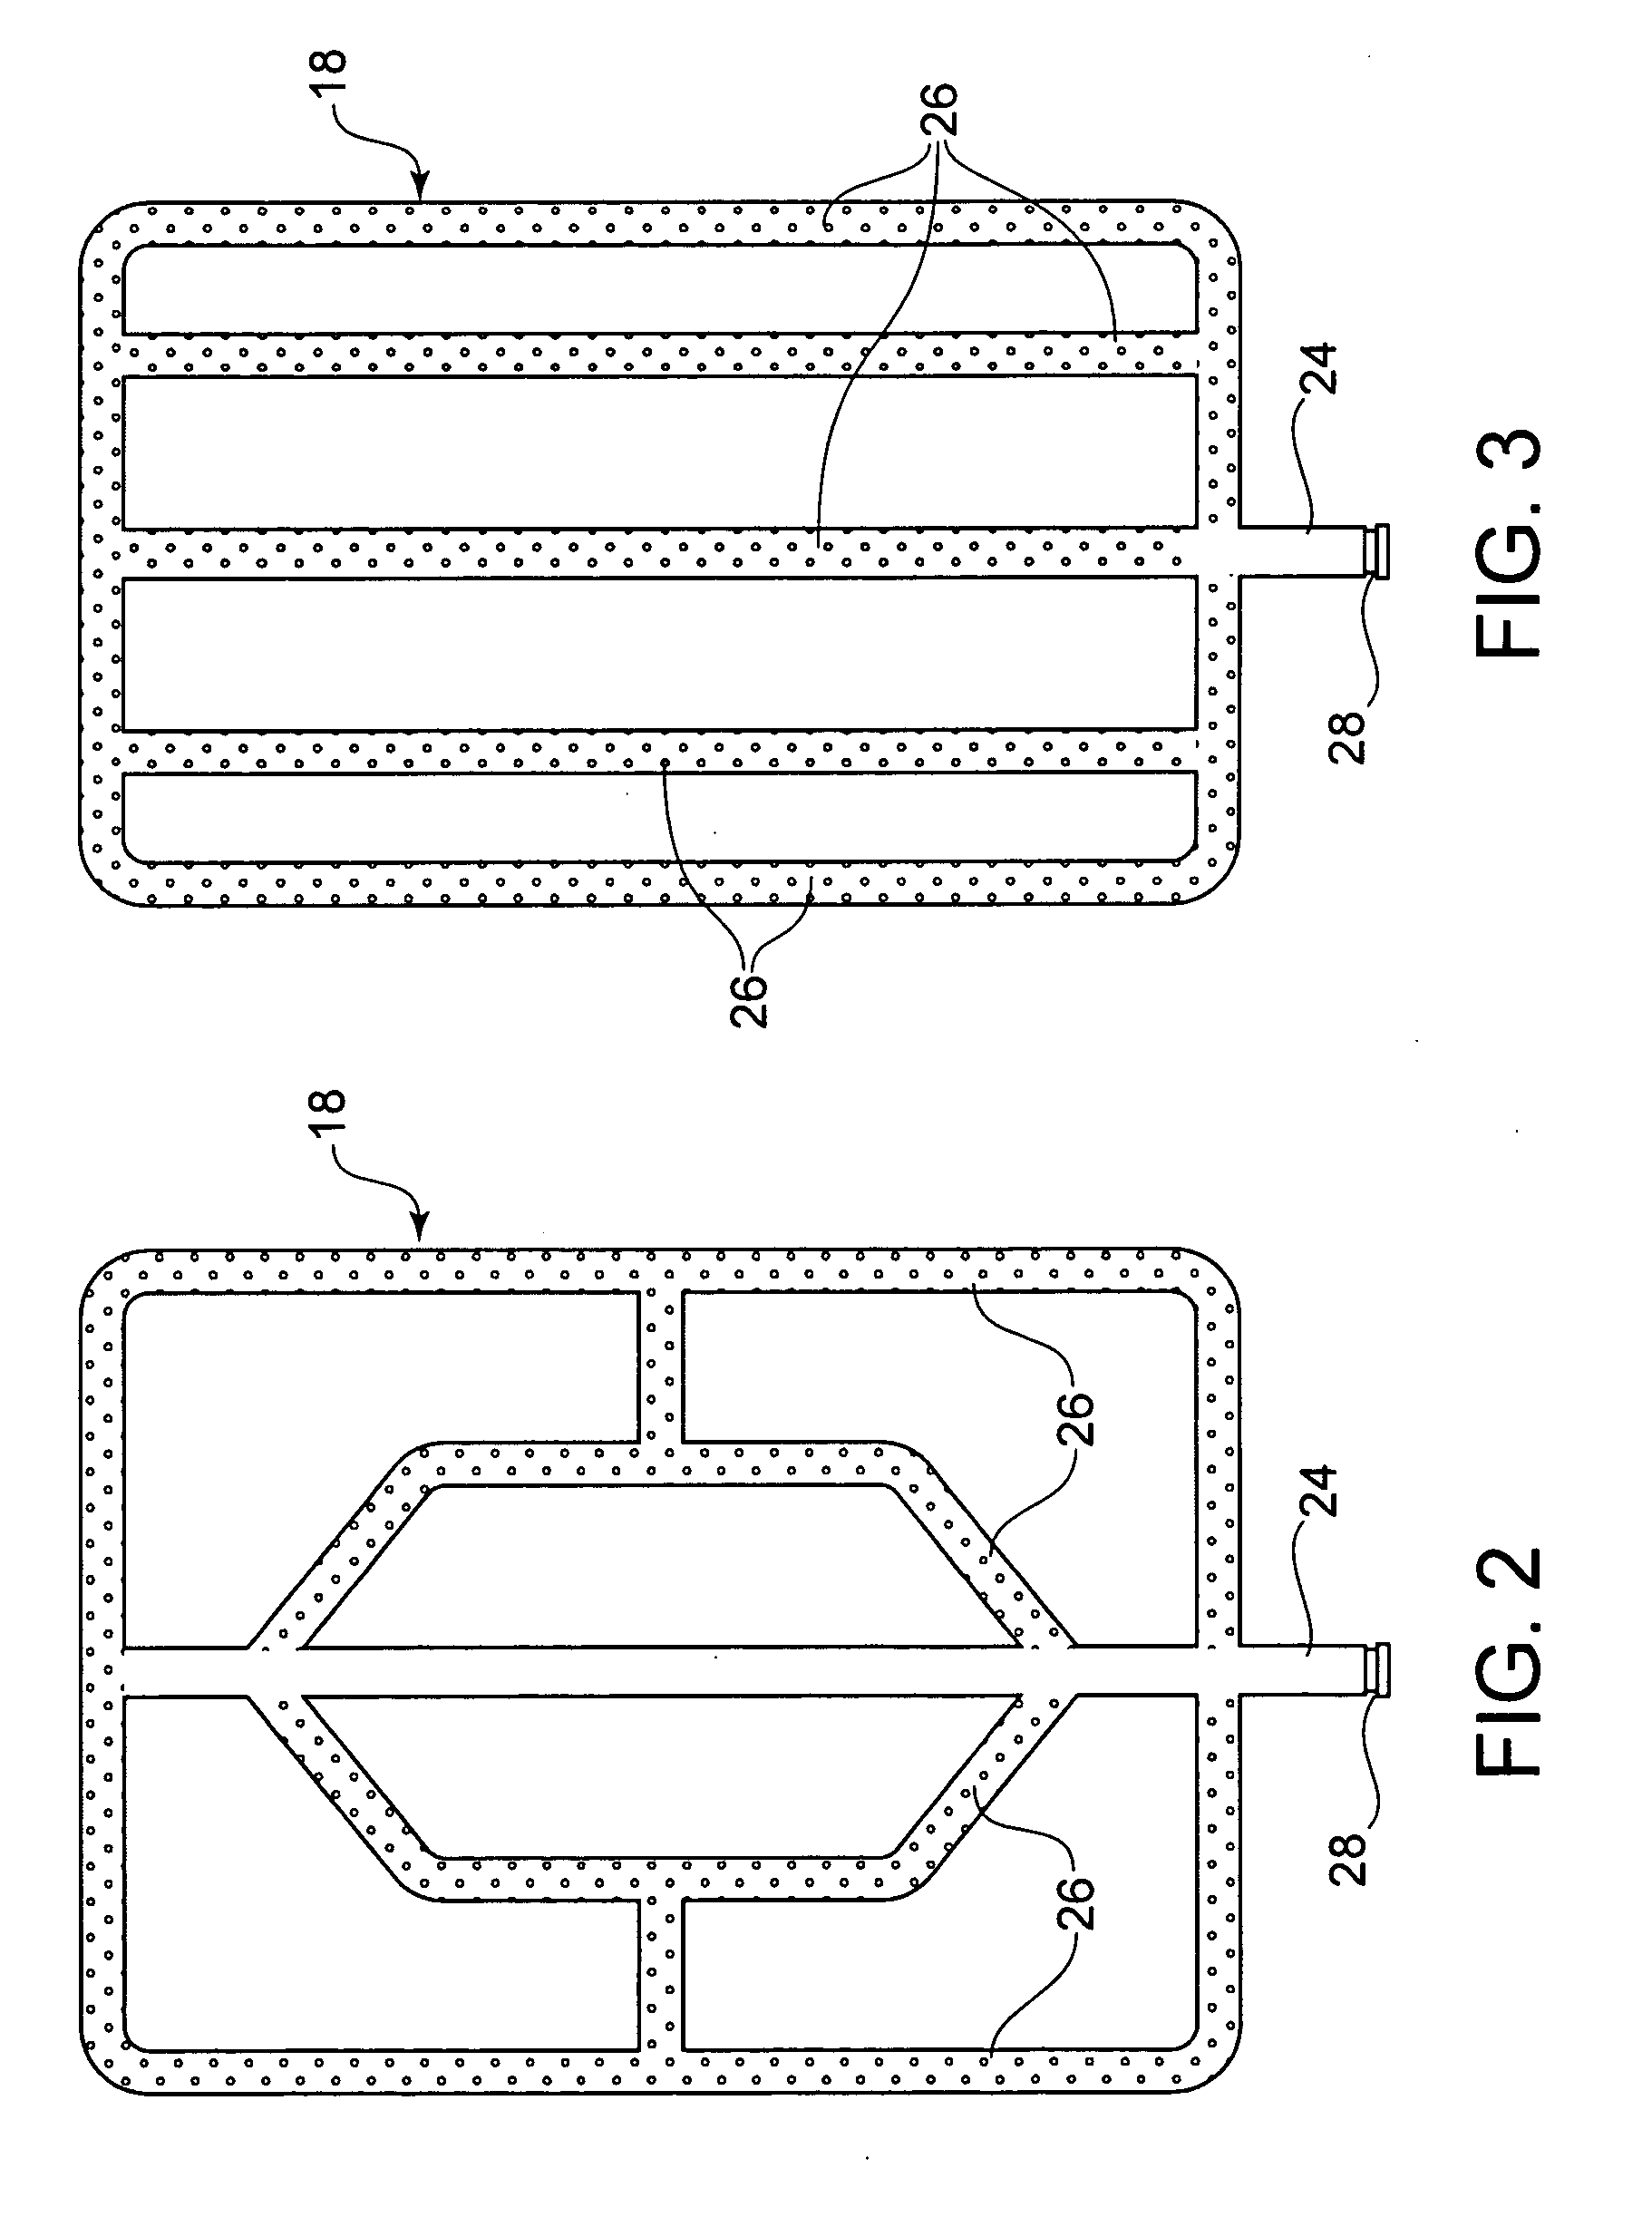 Device for heating, cooling and emitting fragrance into bedding on a bed